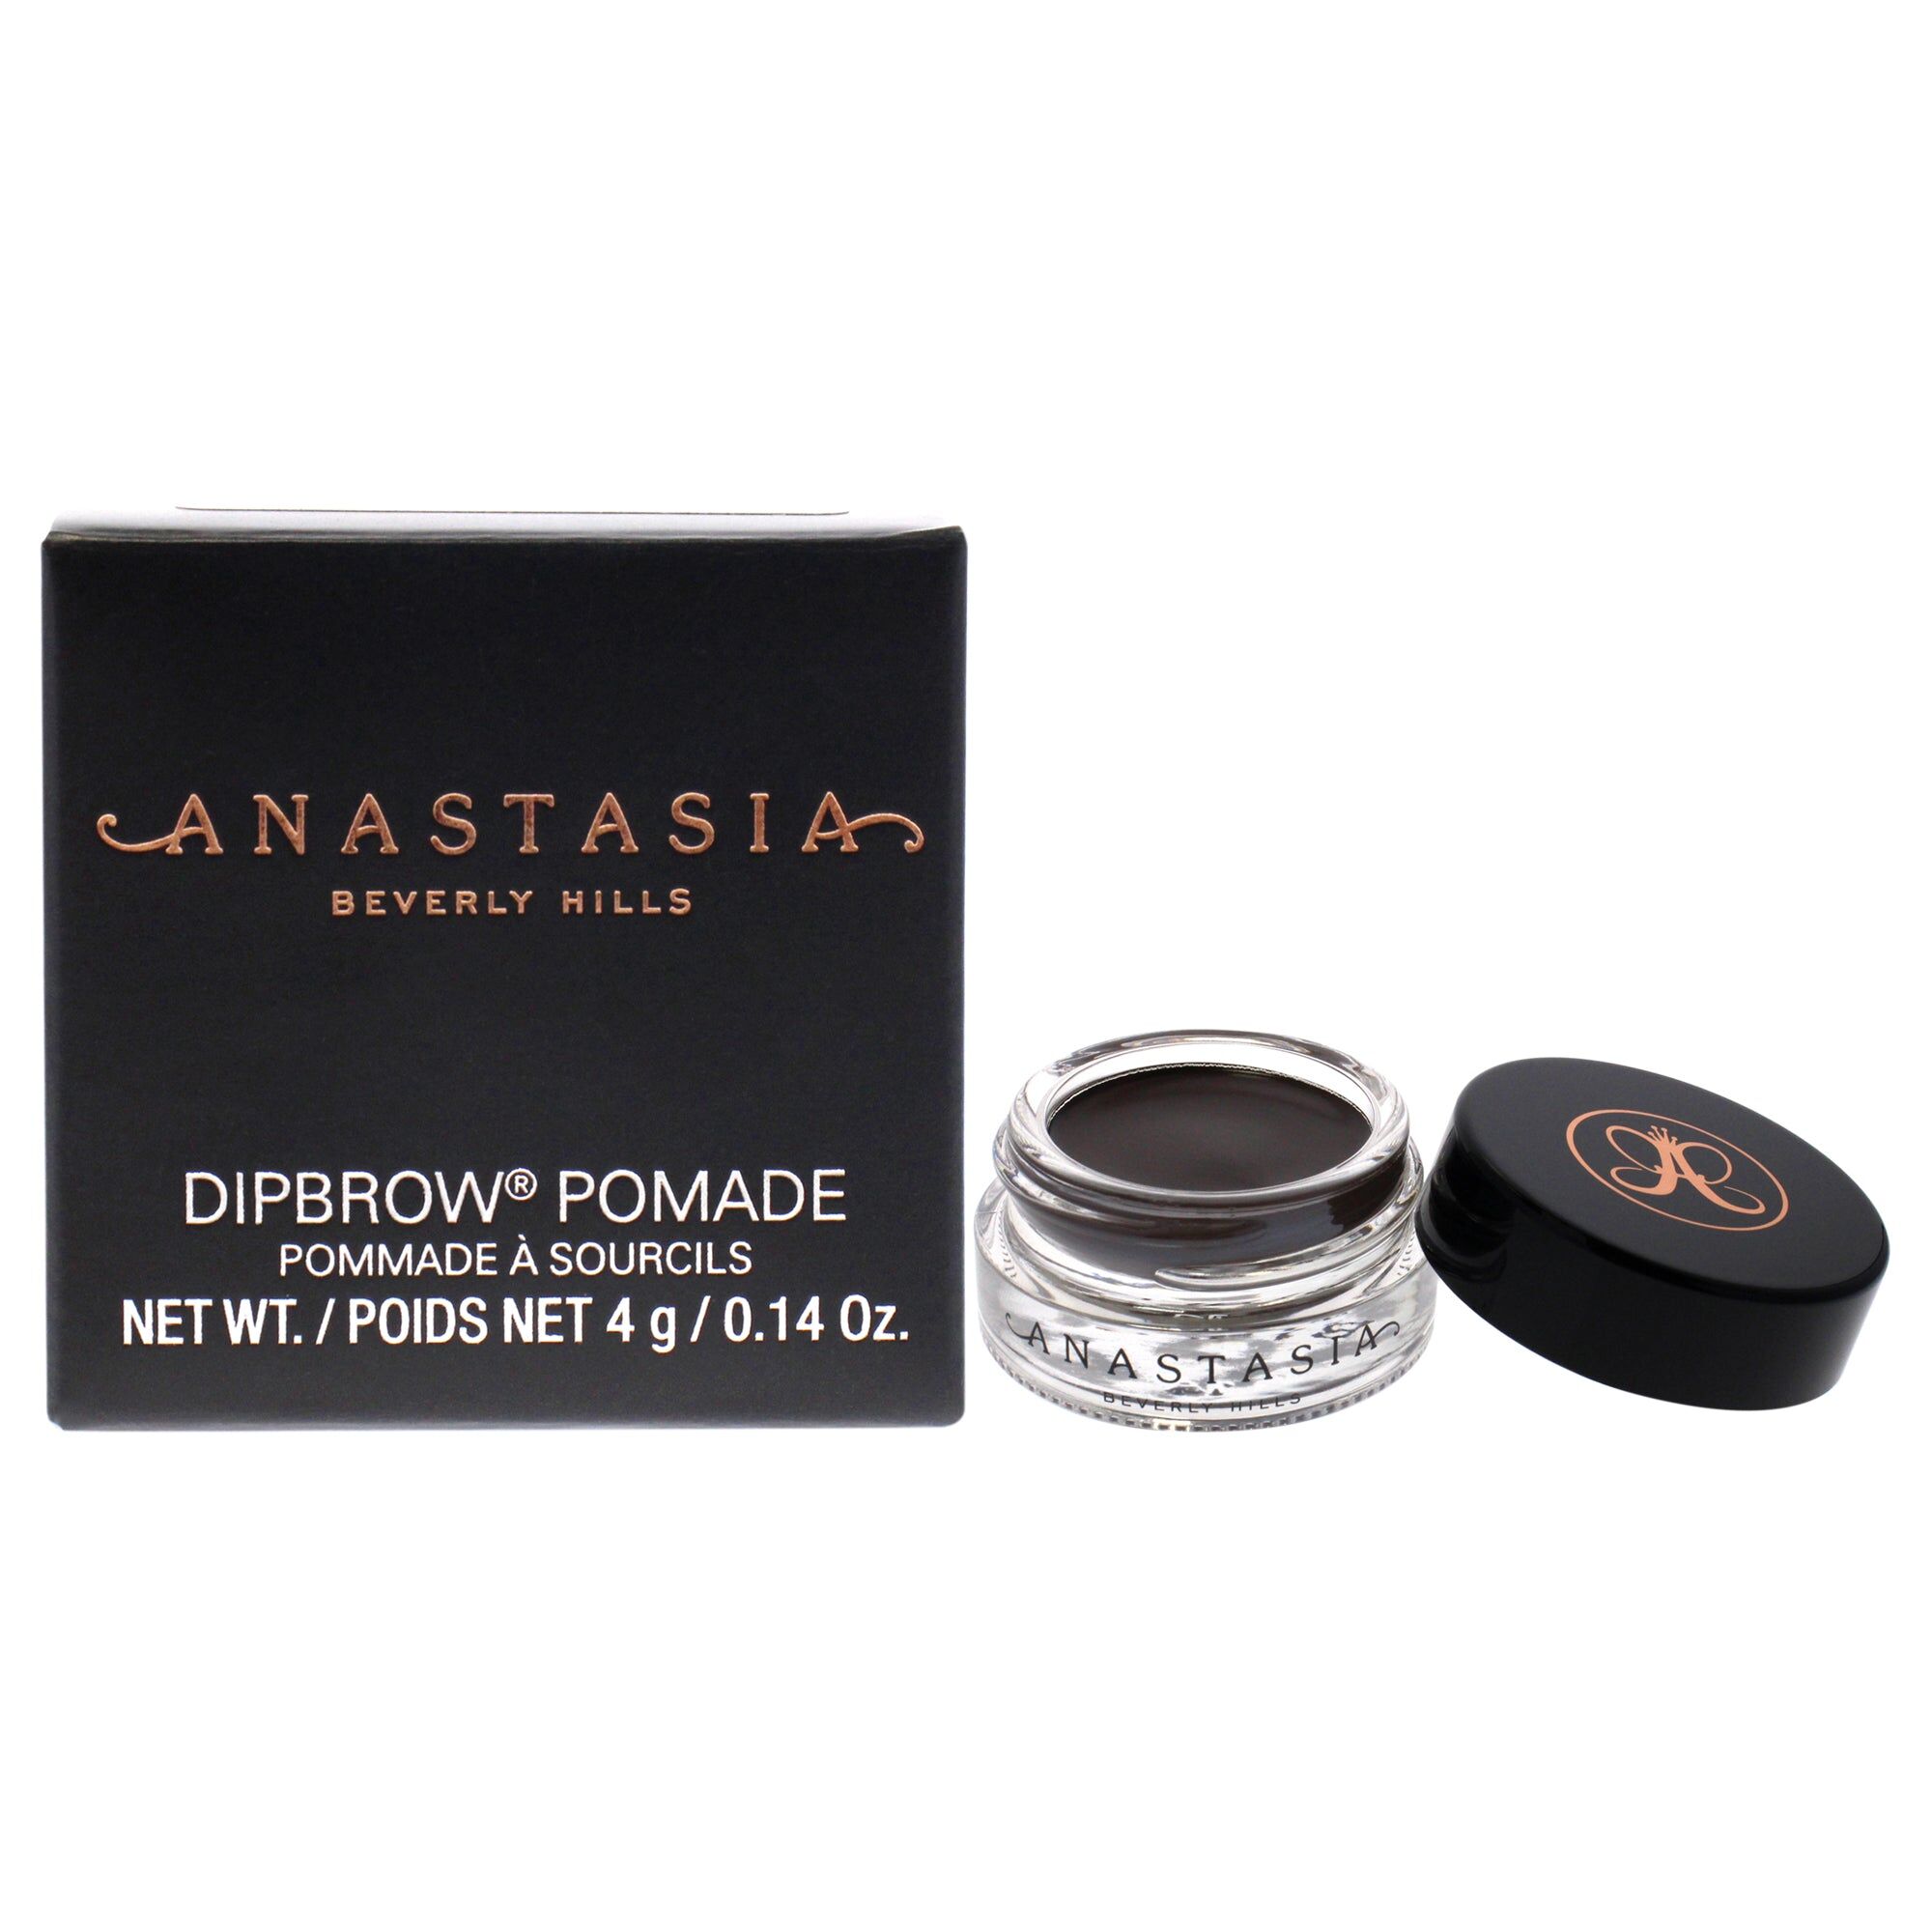 DipBrow Pomade - Medium Brown by Anastasia Beverly Hills for Women - 0.14 oz Eyebrow One Size